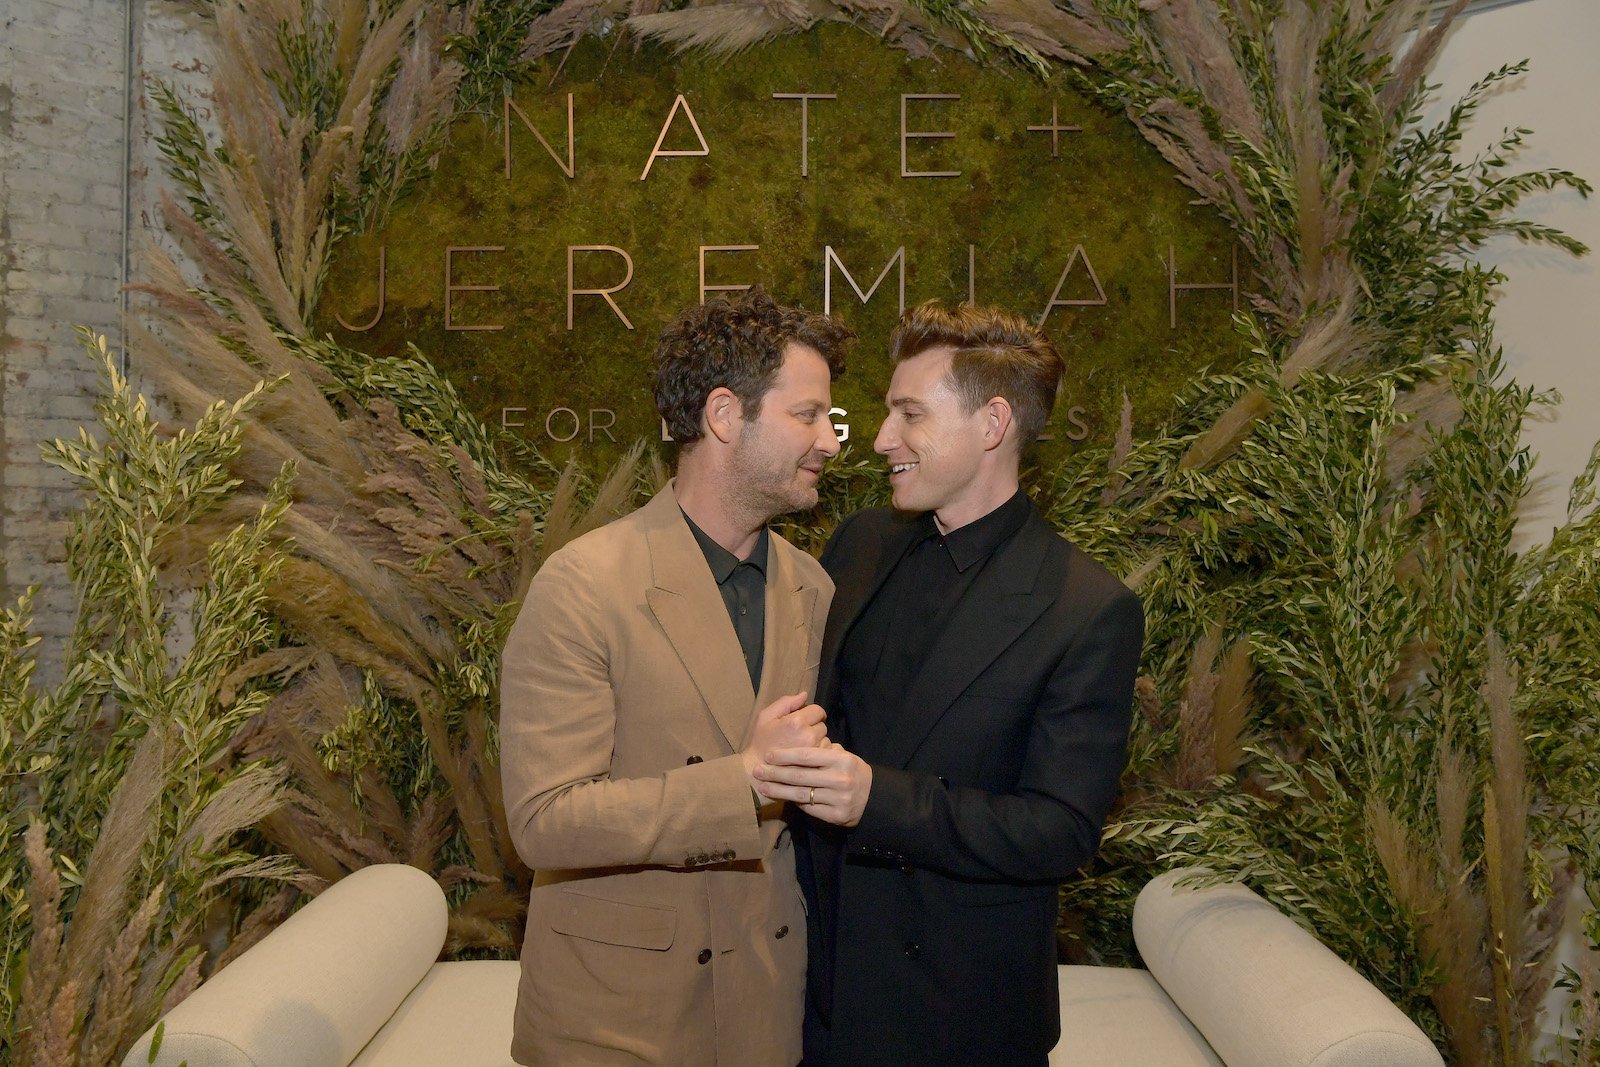 Nate & Jeremiah new show brings the design duo back together again on TV